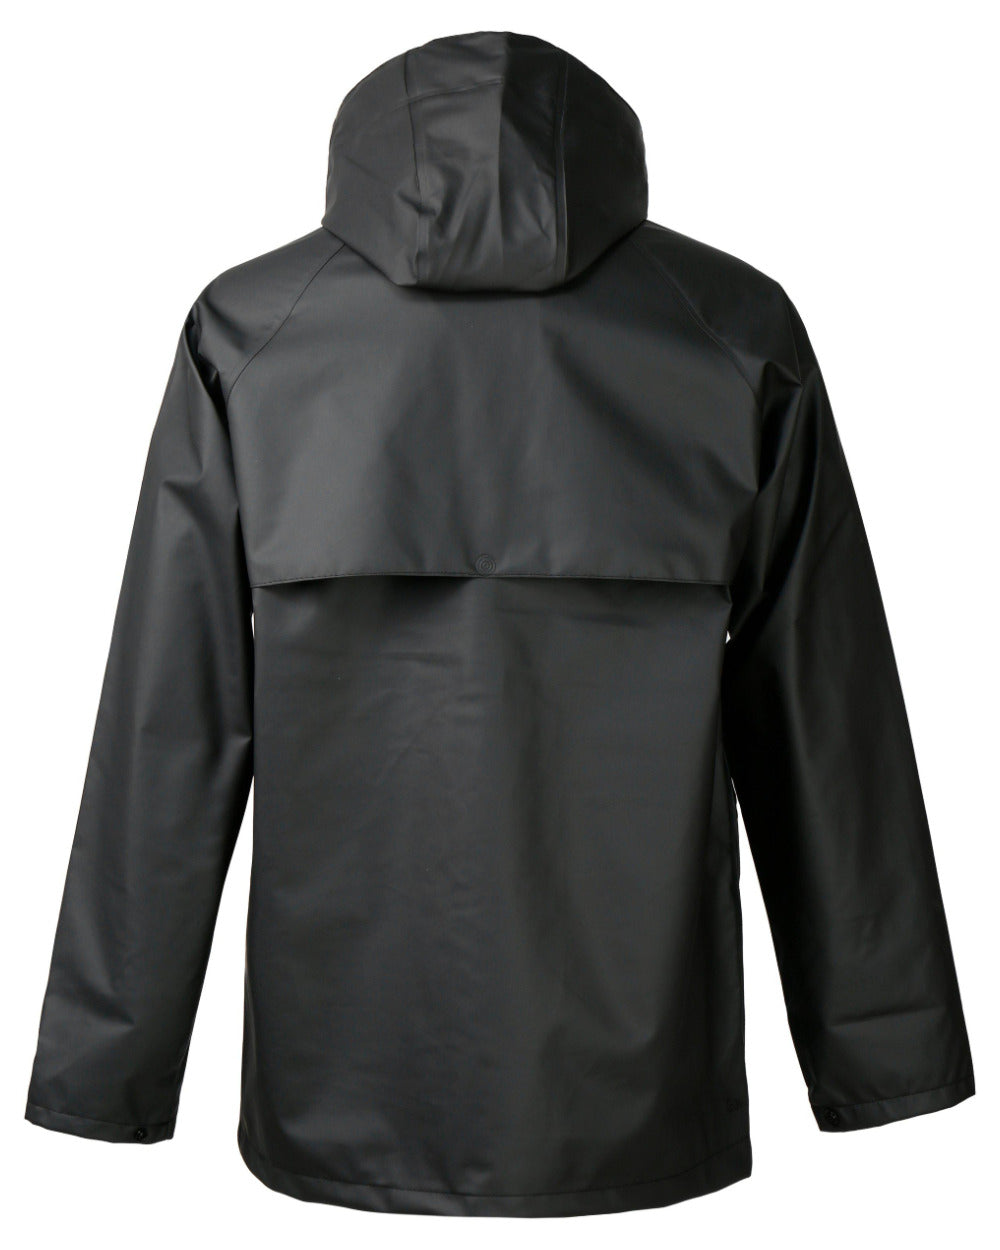 Black Coloured Didriksons Avon Waterproof Jacket On A White Background 